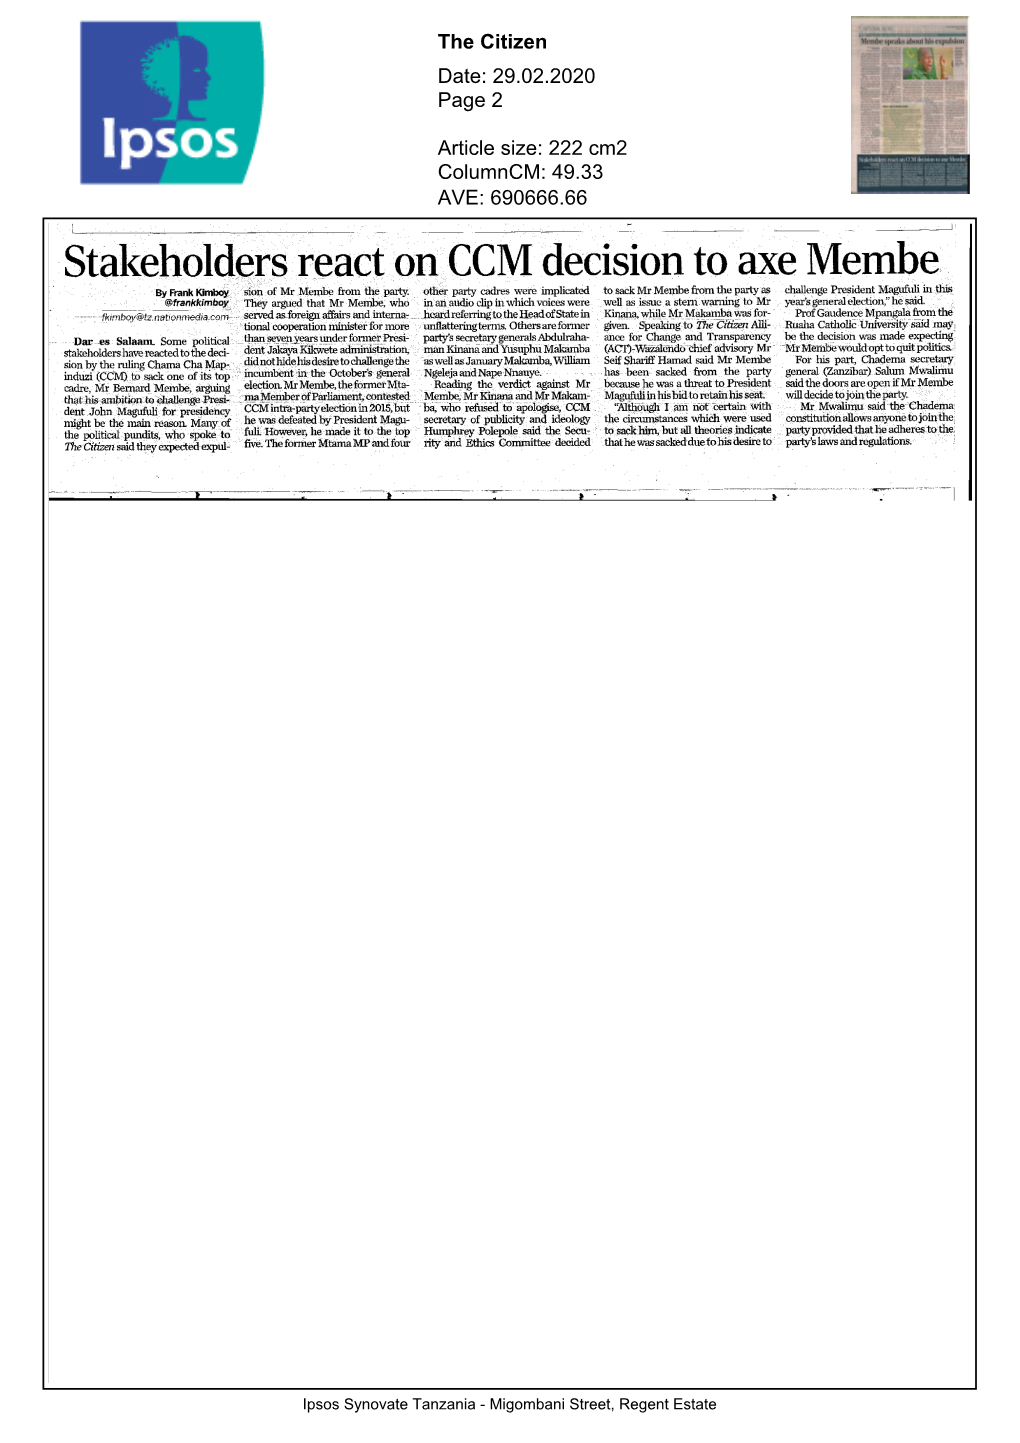 Stakeholders React on CCM Decision to Axe Membe